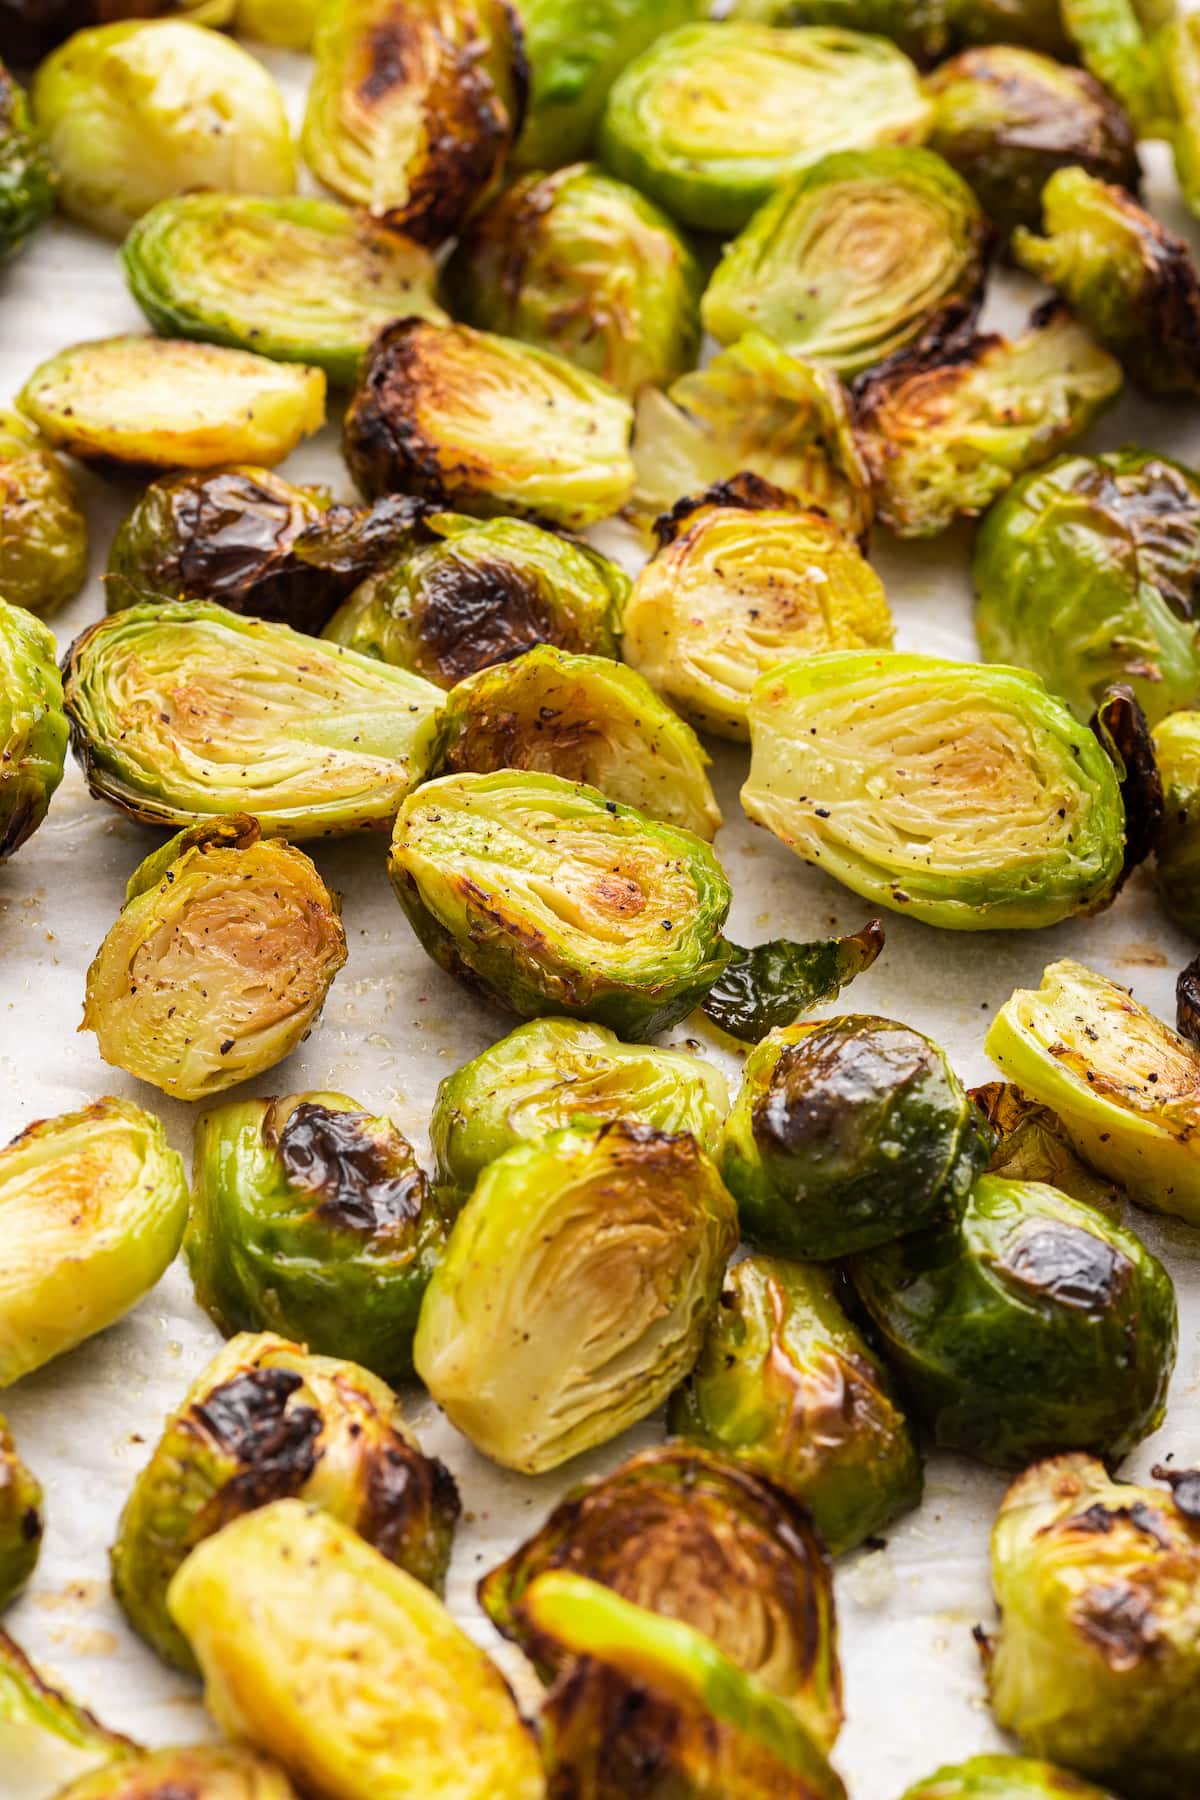 roasted Brussels sprouts are caramelized and crispy on the outside and perfectly tender on the inside.